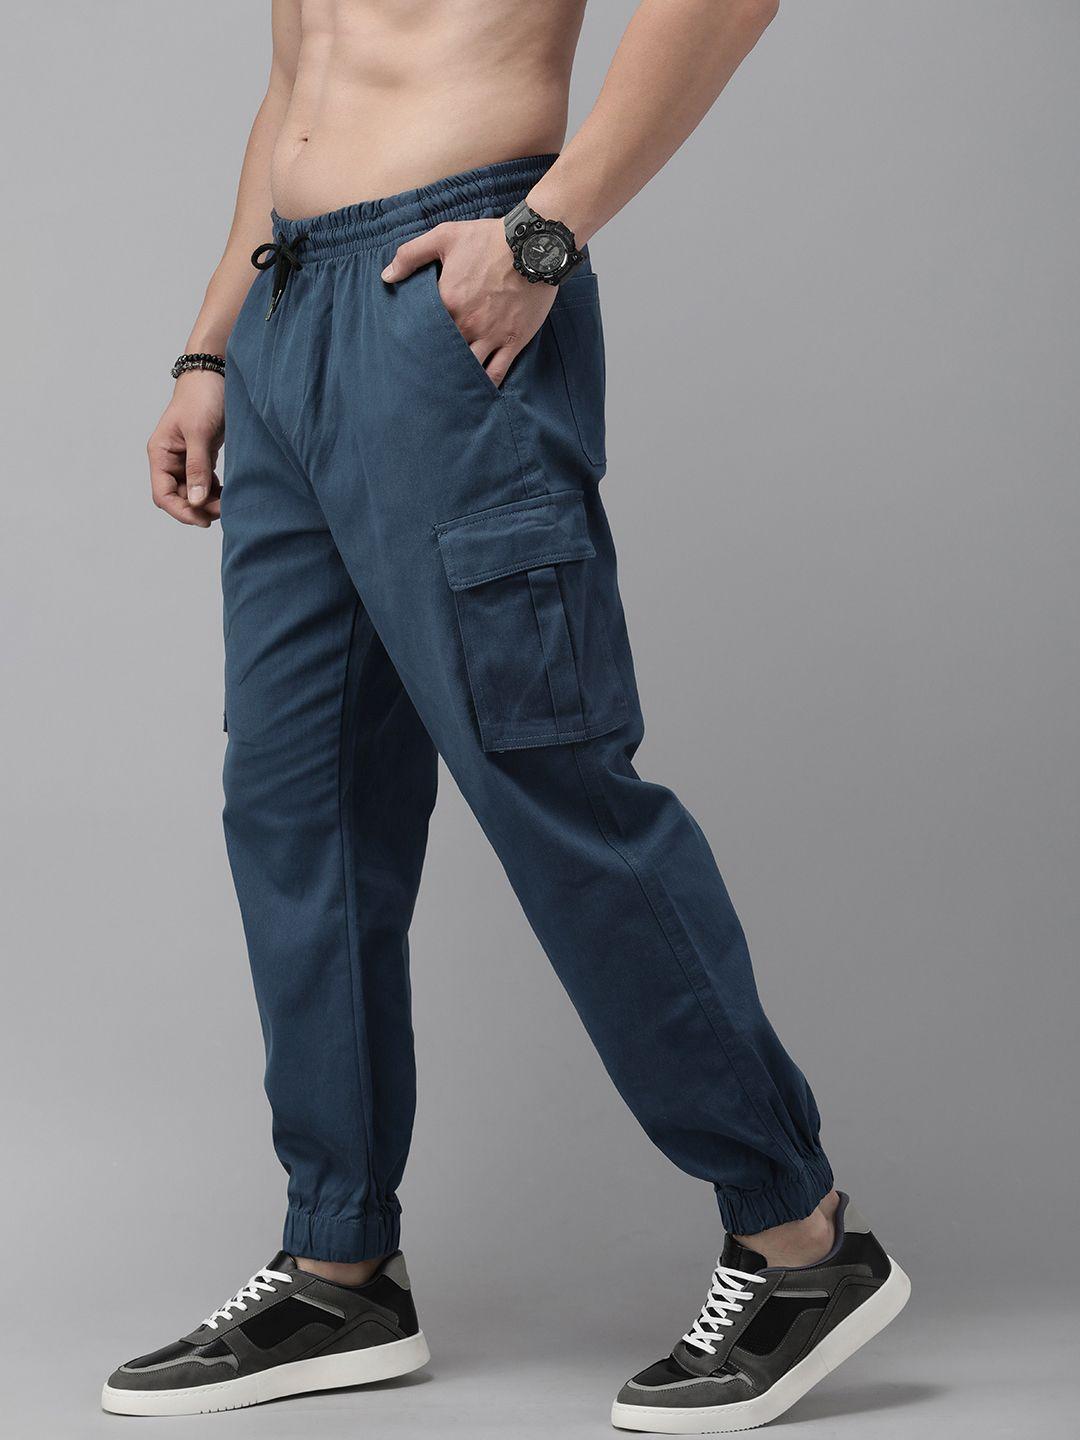 the-roadster-life-co.-men-cargo-trousers